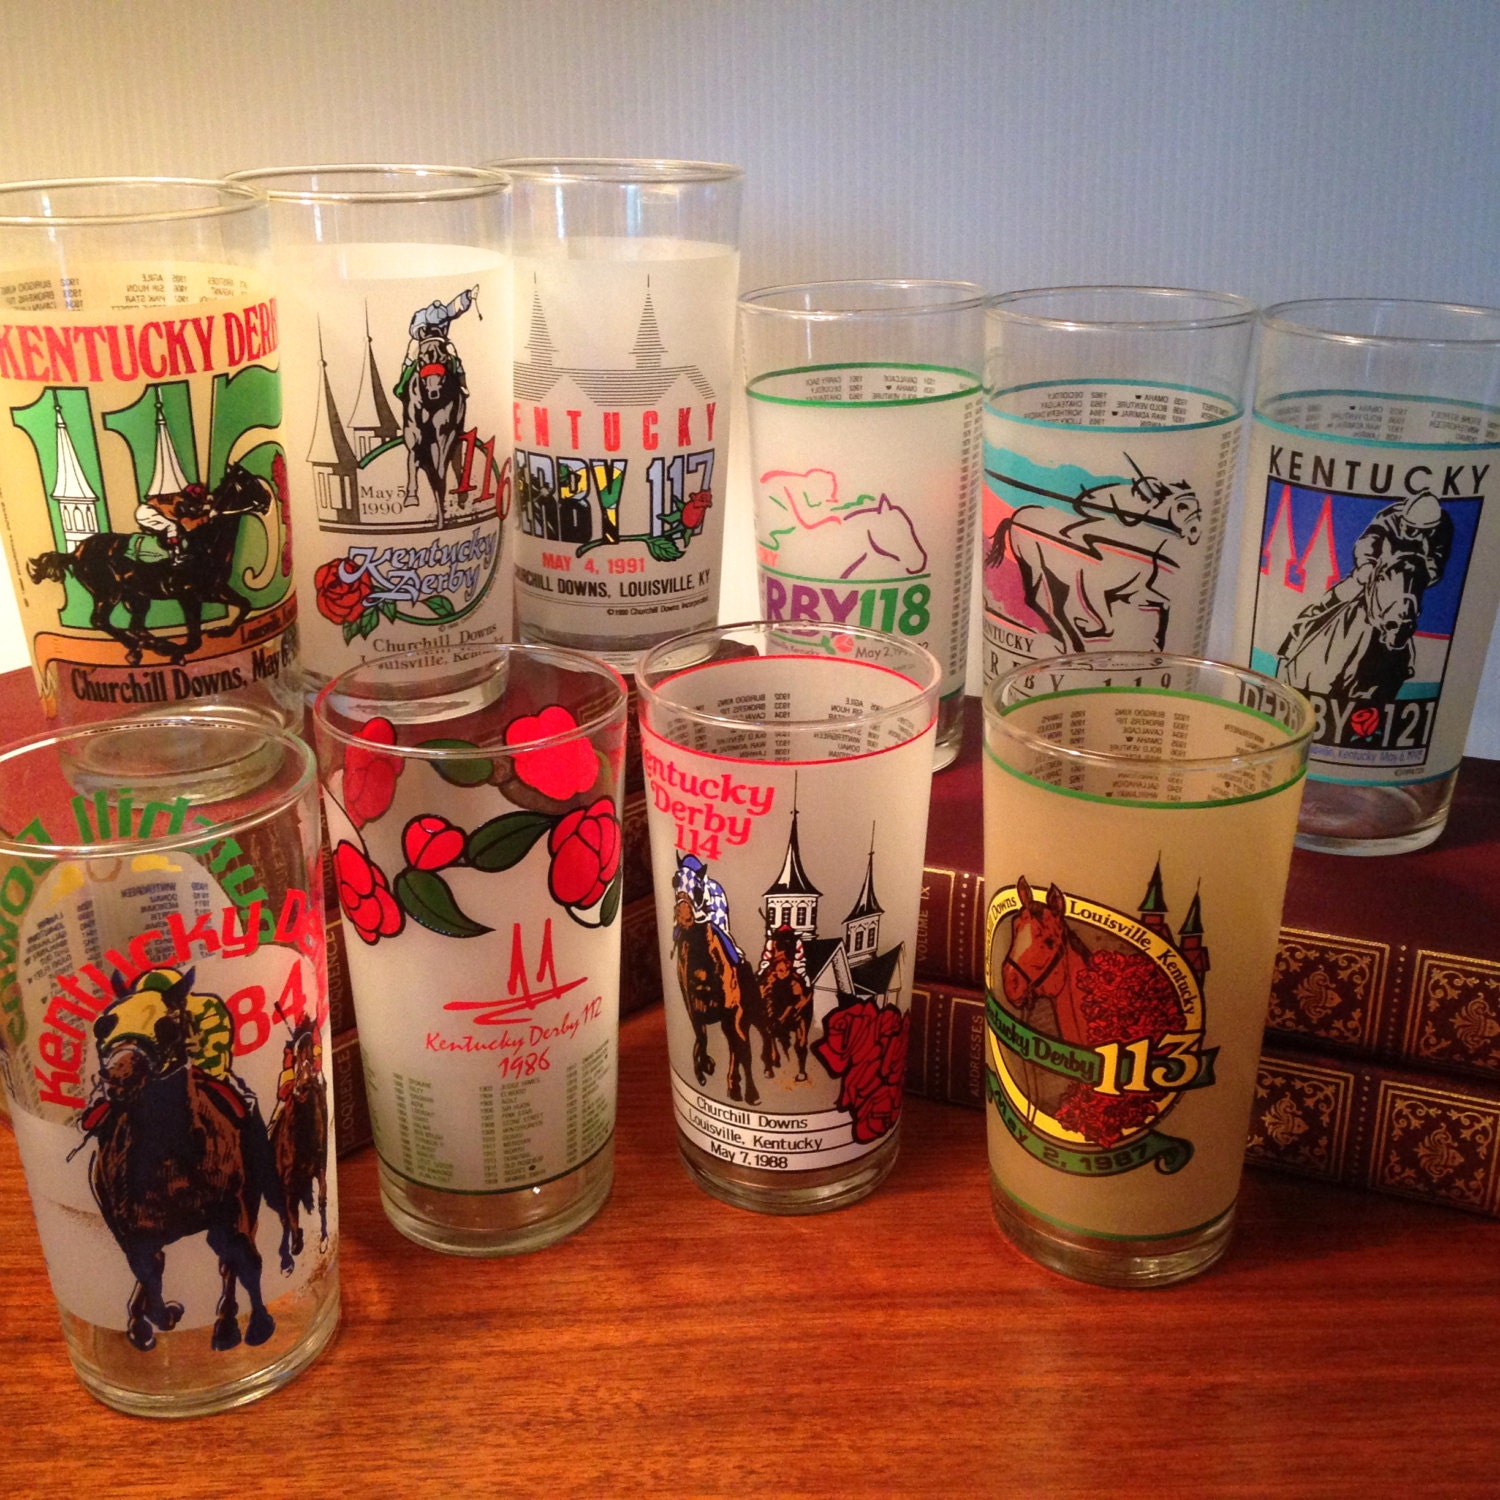 Kentucky Derby glasses pick your winner one by FromTheSeller